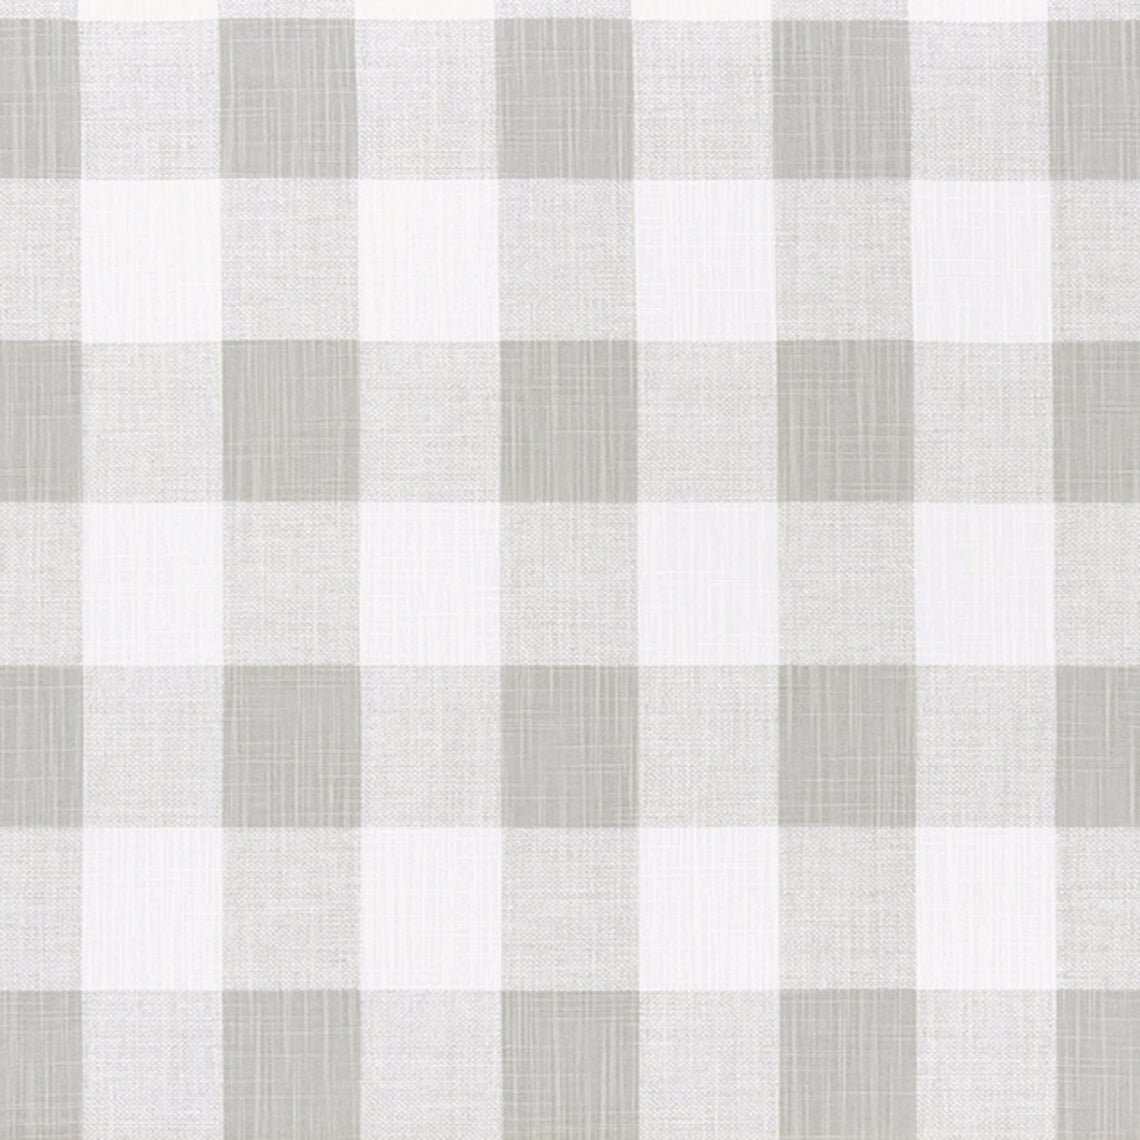 tailored tier cafe curtain panels pair in anderson french grey buffalo check plaid